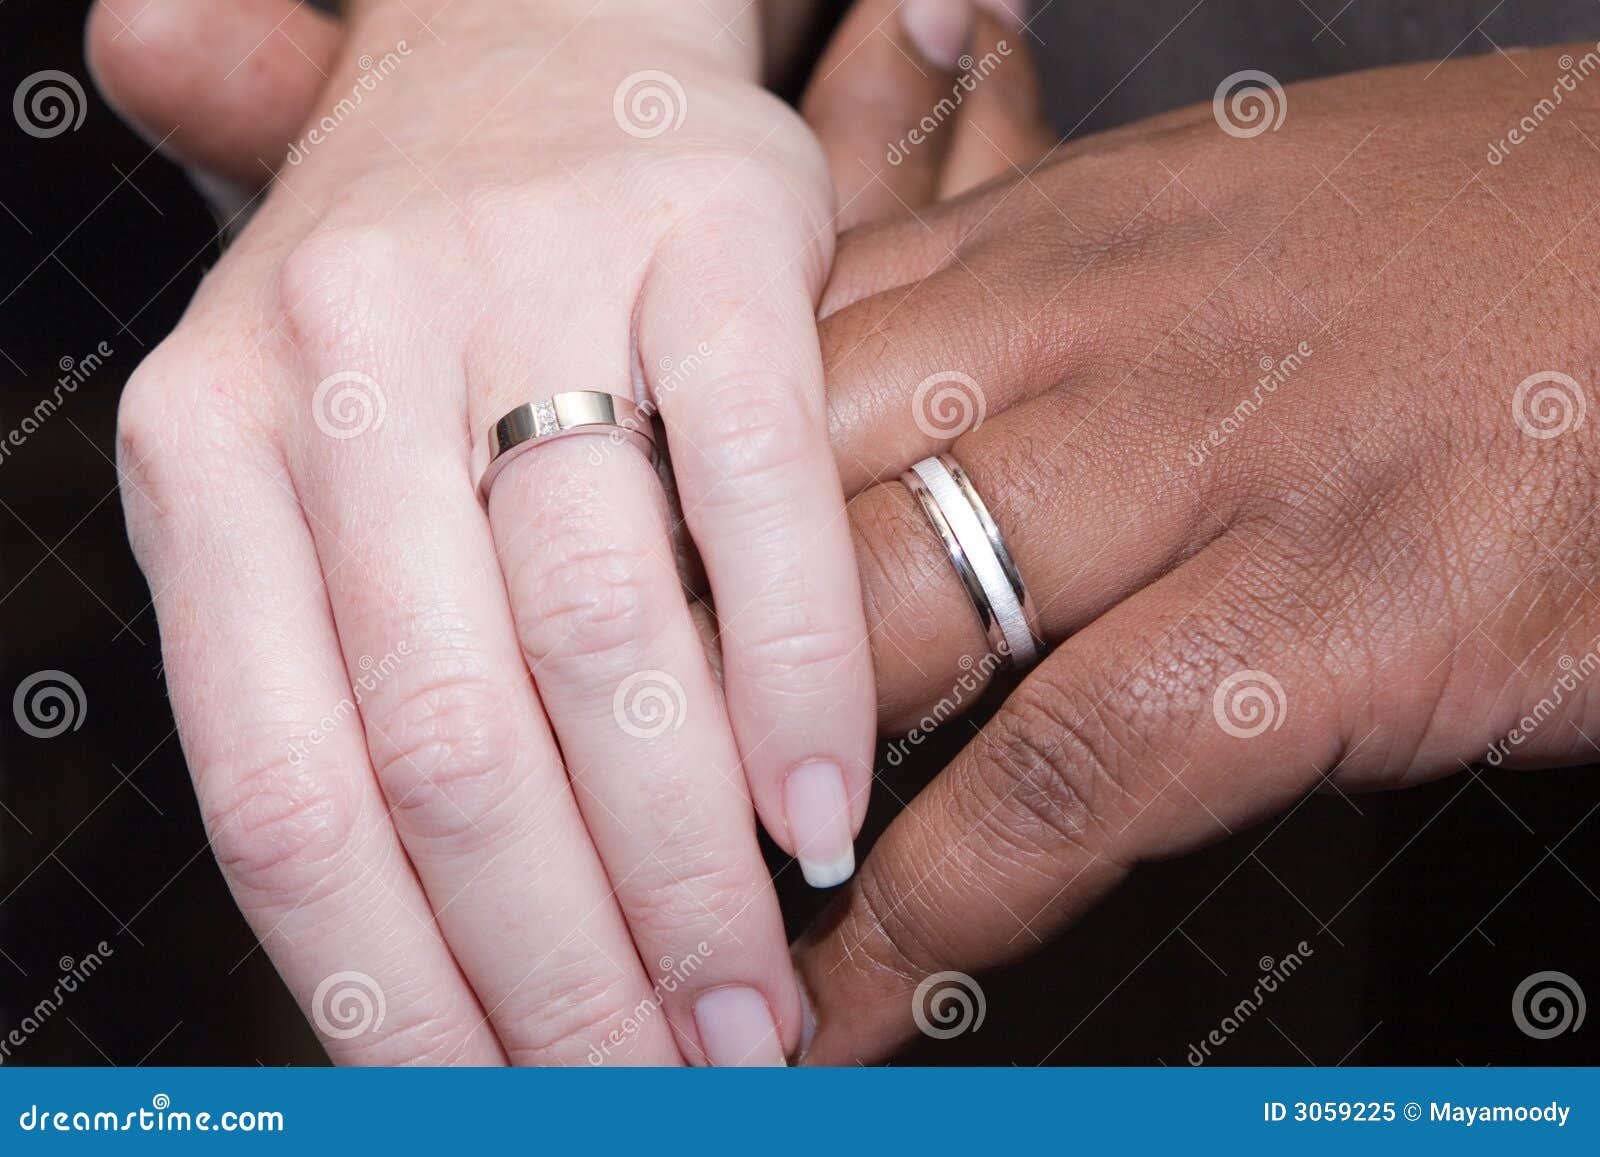 Wedding ring pictures with hands